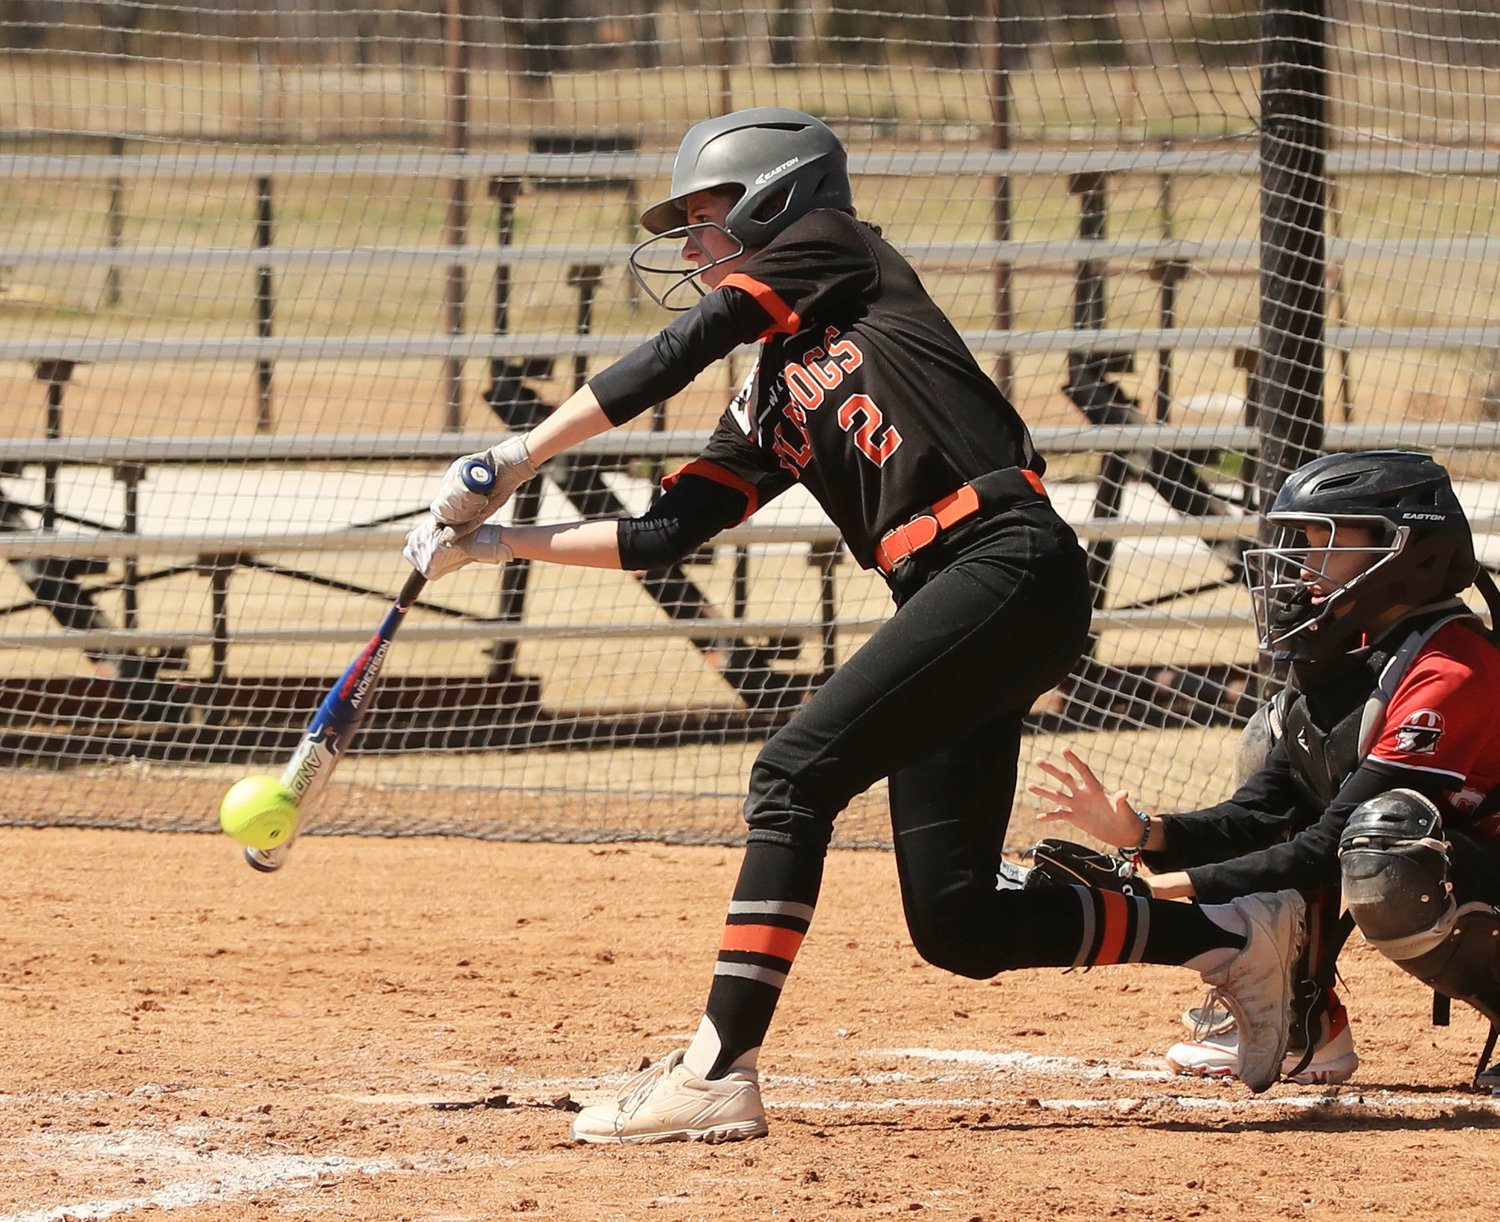 Wayne sophomore Haylee Durrence gives a ball a ride during the Bulldogs’ 25-0 win over Crooked Oak. Durrence went 4-4 with three RBIs in the win.